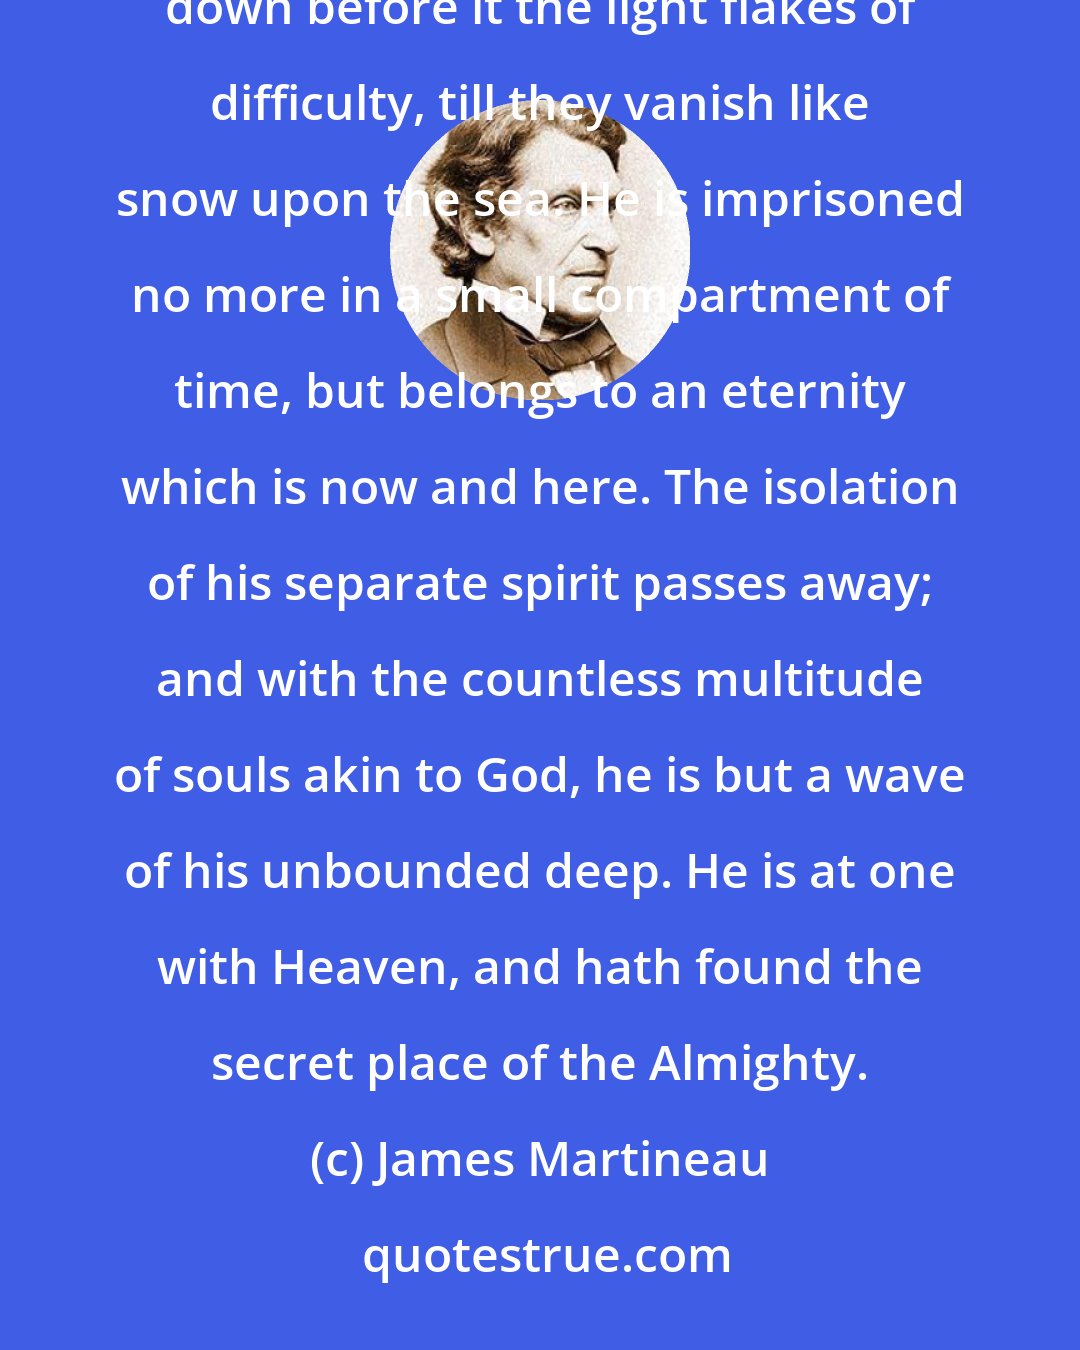 James Martineau: A mighty wind of resolution sets in strong upon him and freshens the whole atmosphere of his soul, sweeping down before it the light flakes of difficulty, till they vanish like snow upon the sea. He is imprisoned no more in a small compartment of time, but belongs to an eternity which is now and here. The isolation of his separate spirit passes away; and with the countless multitude of souls akin to God, he is but a wave of his unbounded deep. He is at one with Heaven, and hath found the secret place of the Almighty.